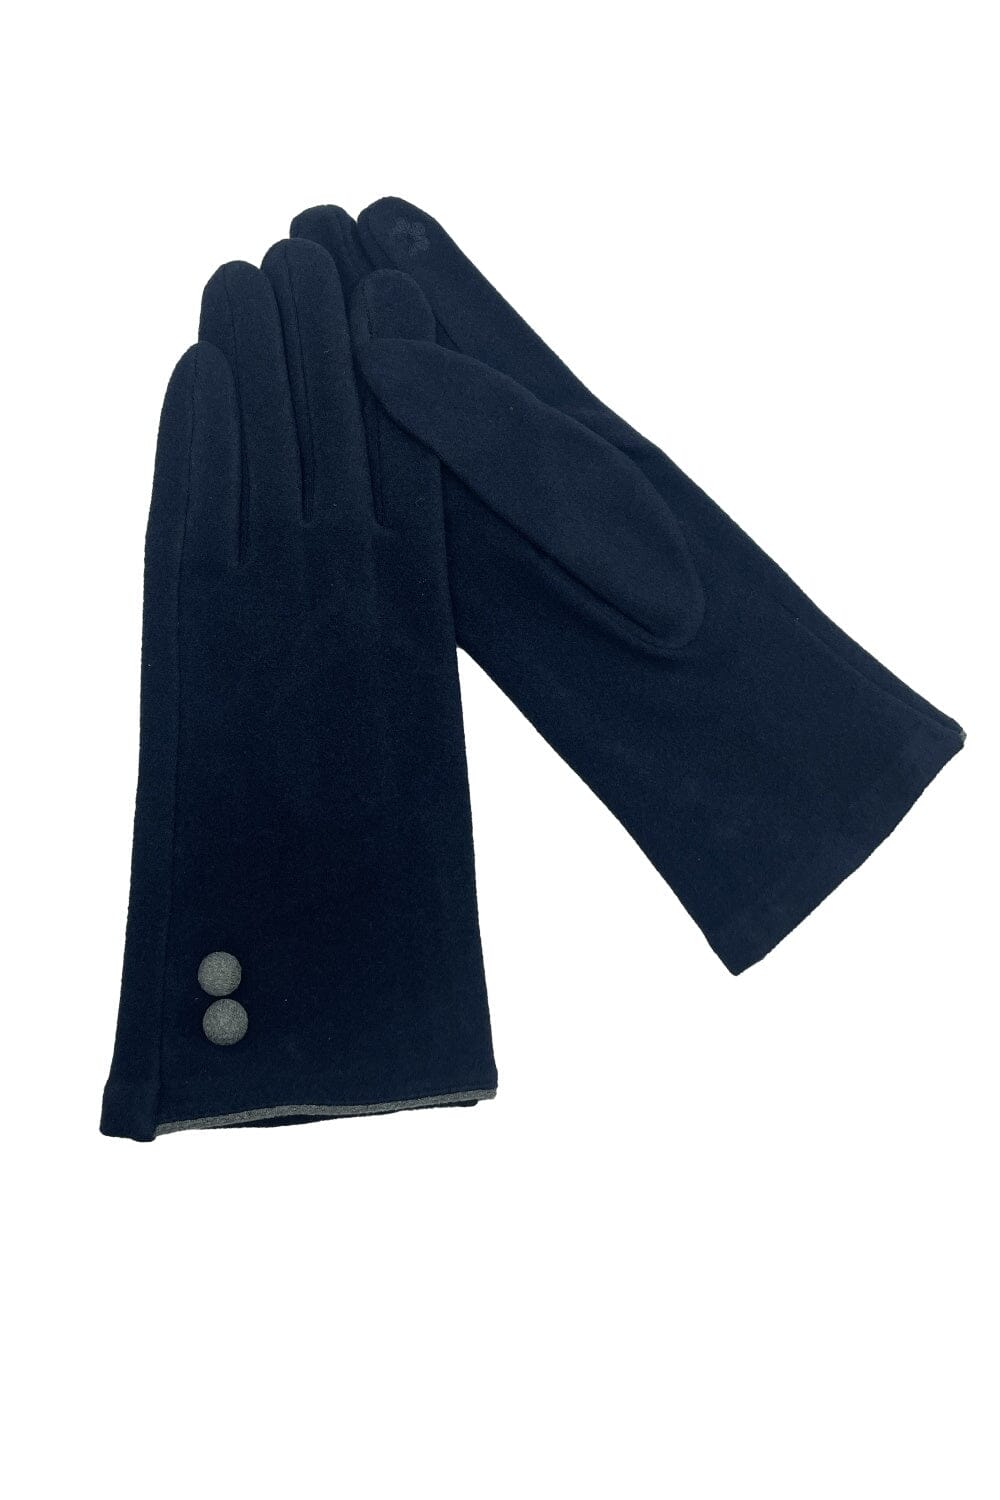 Lilah Glove Navy Accessories